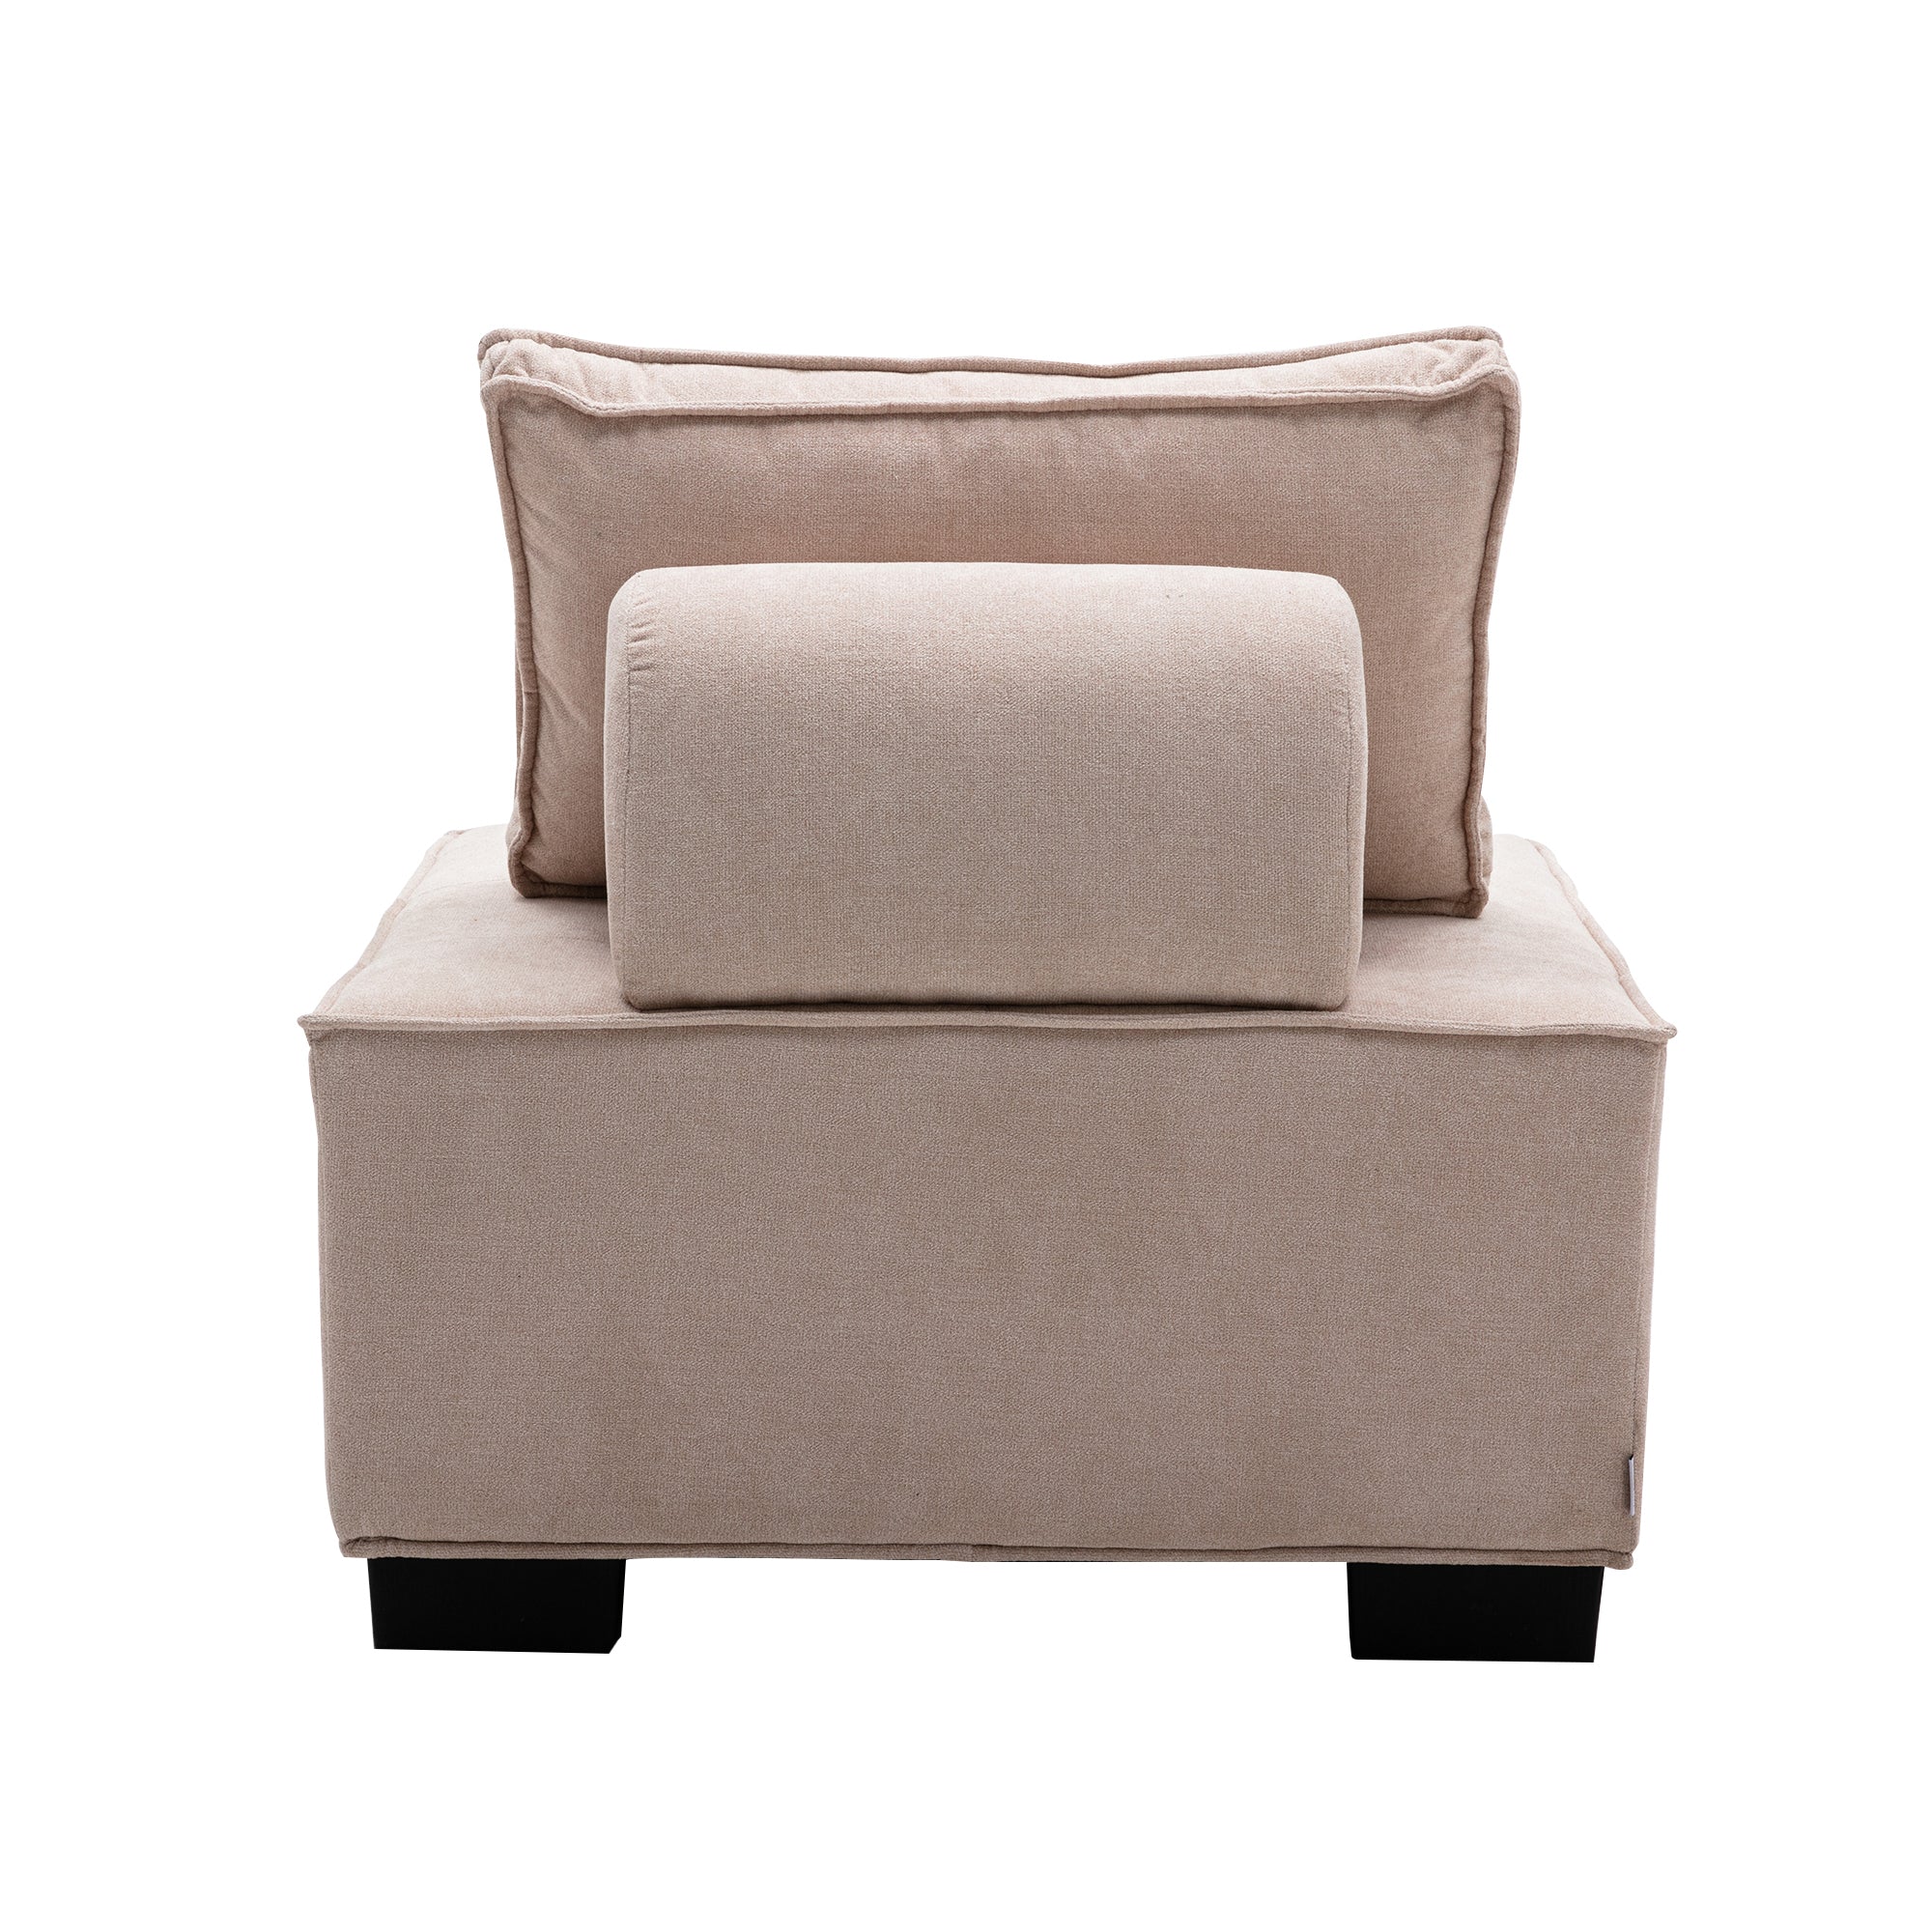 COOMORE LIVING ROOM OTTOMAN LAZY CHAIR beige-polyester